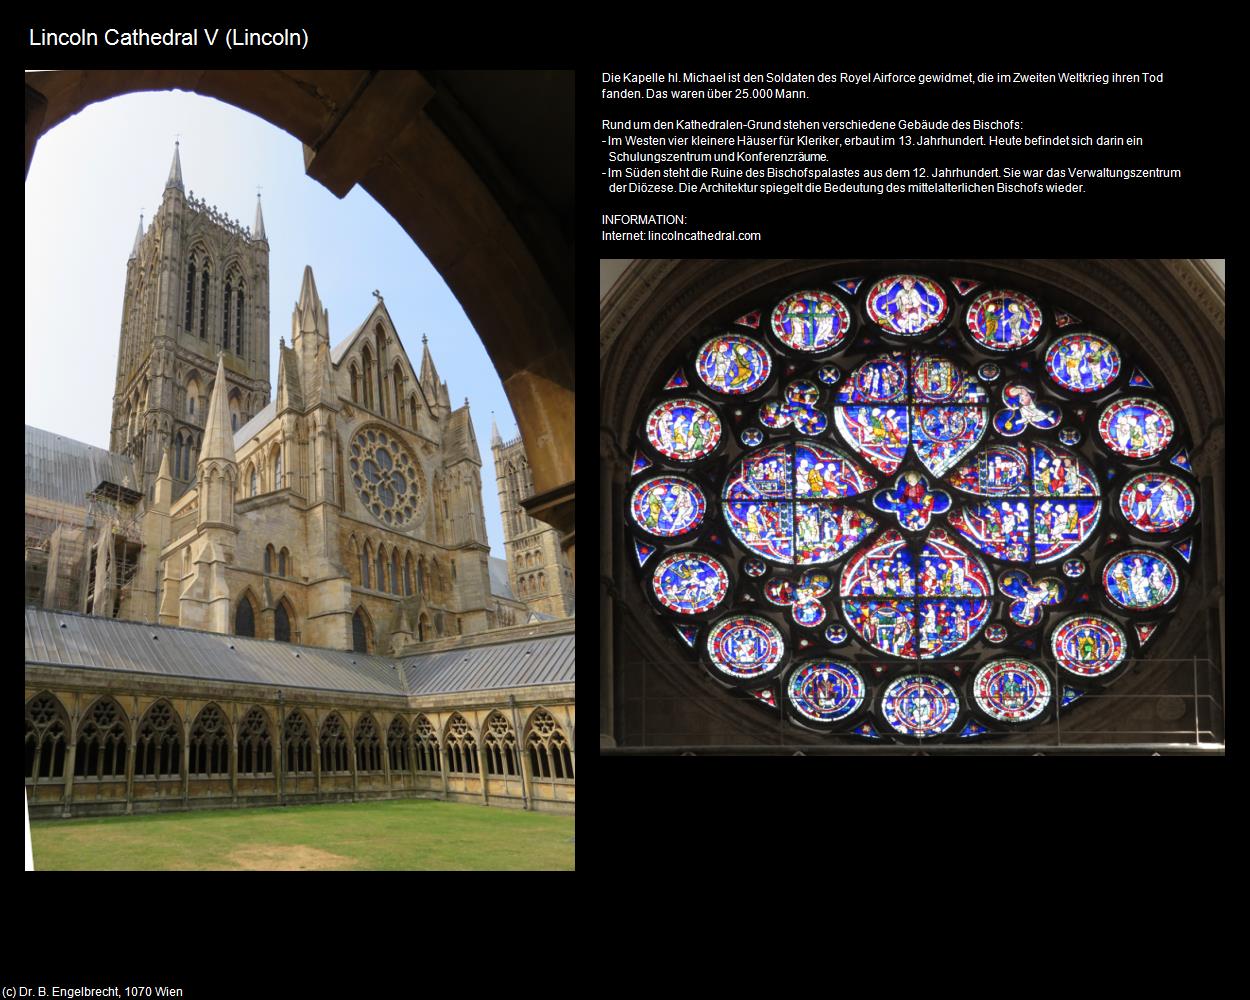 Lincoln Cathedral V  (Lincoln, England) in Kulturatlas-ENGLAND und WALES